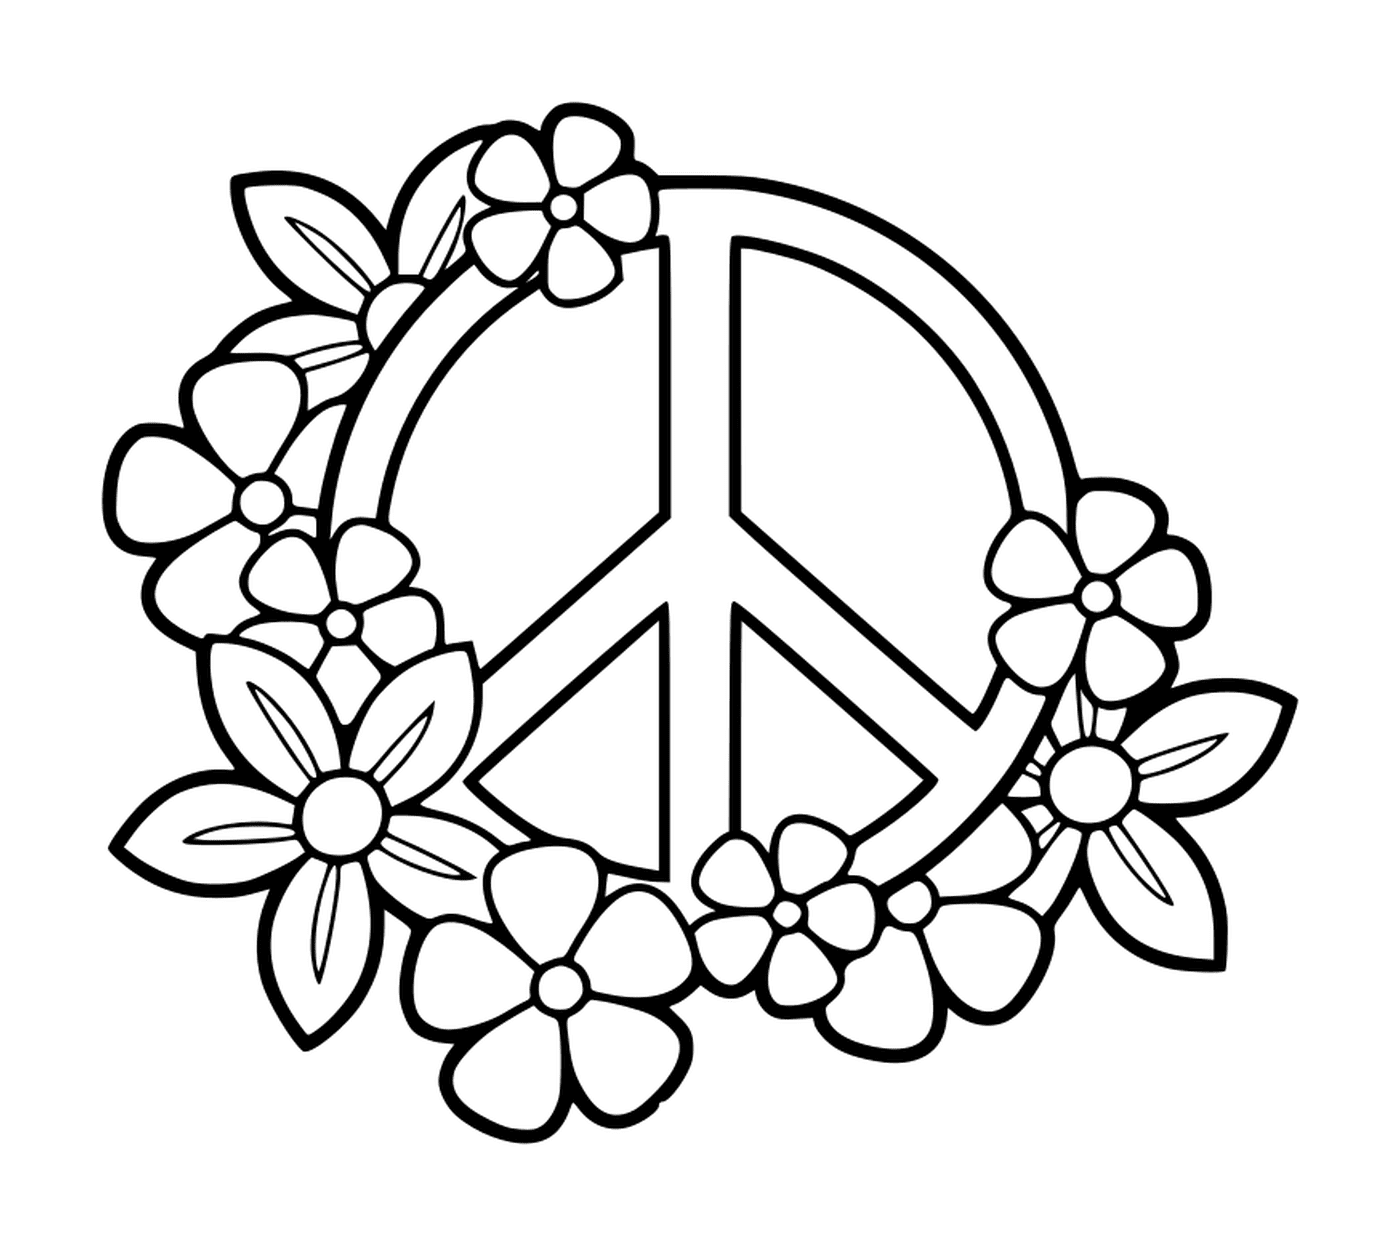  Sign of peace with flowers 